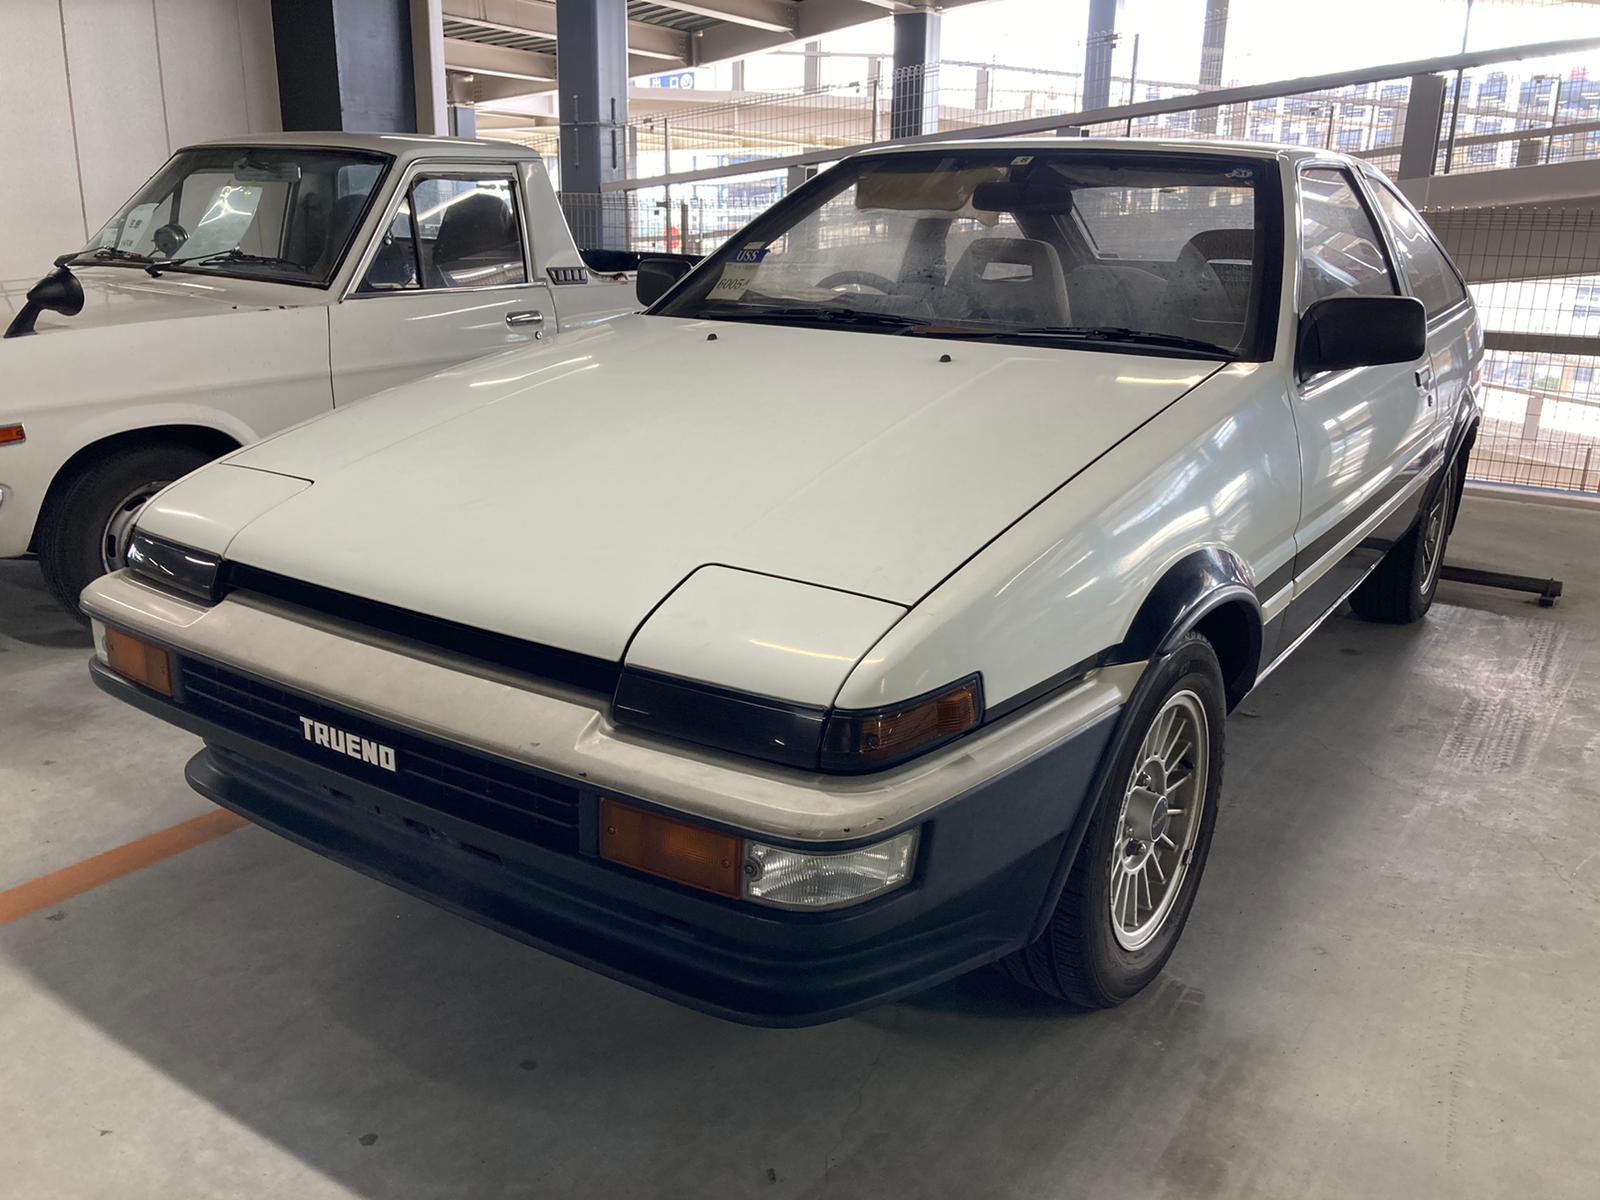 AE86 Project Inspection